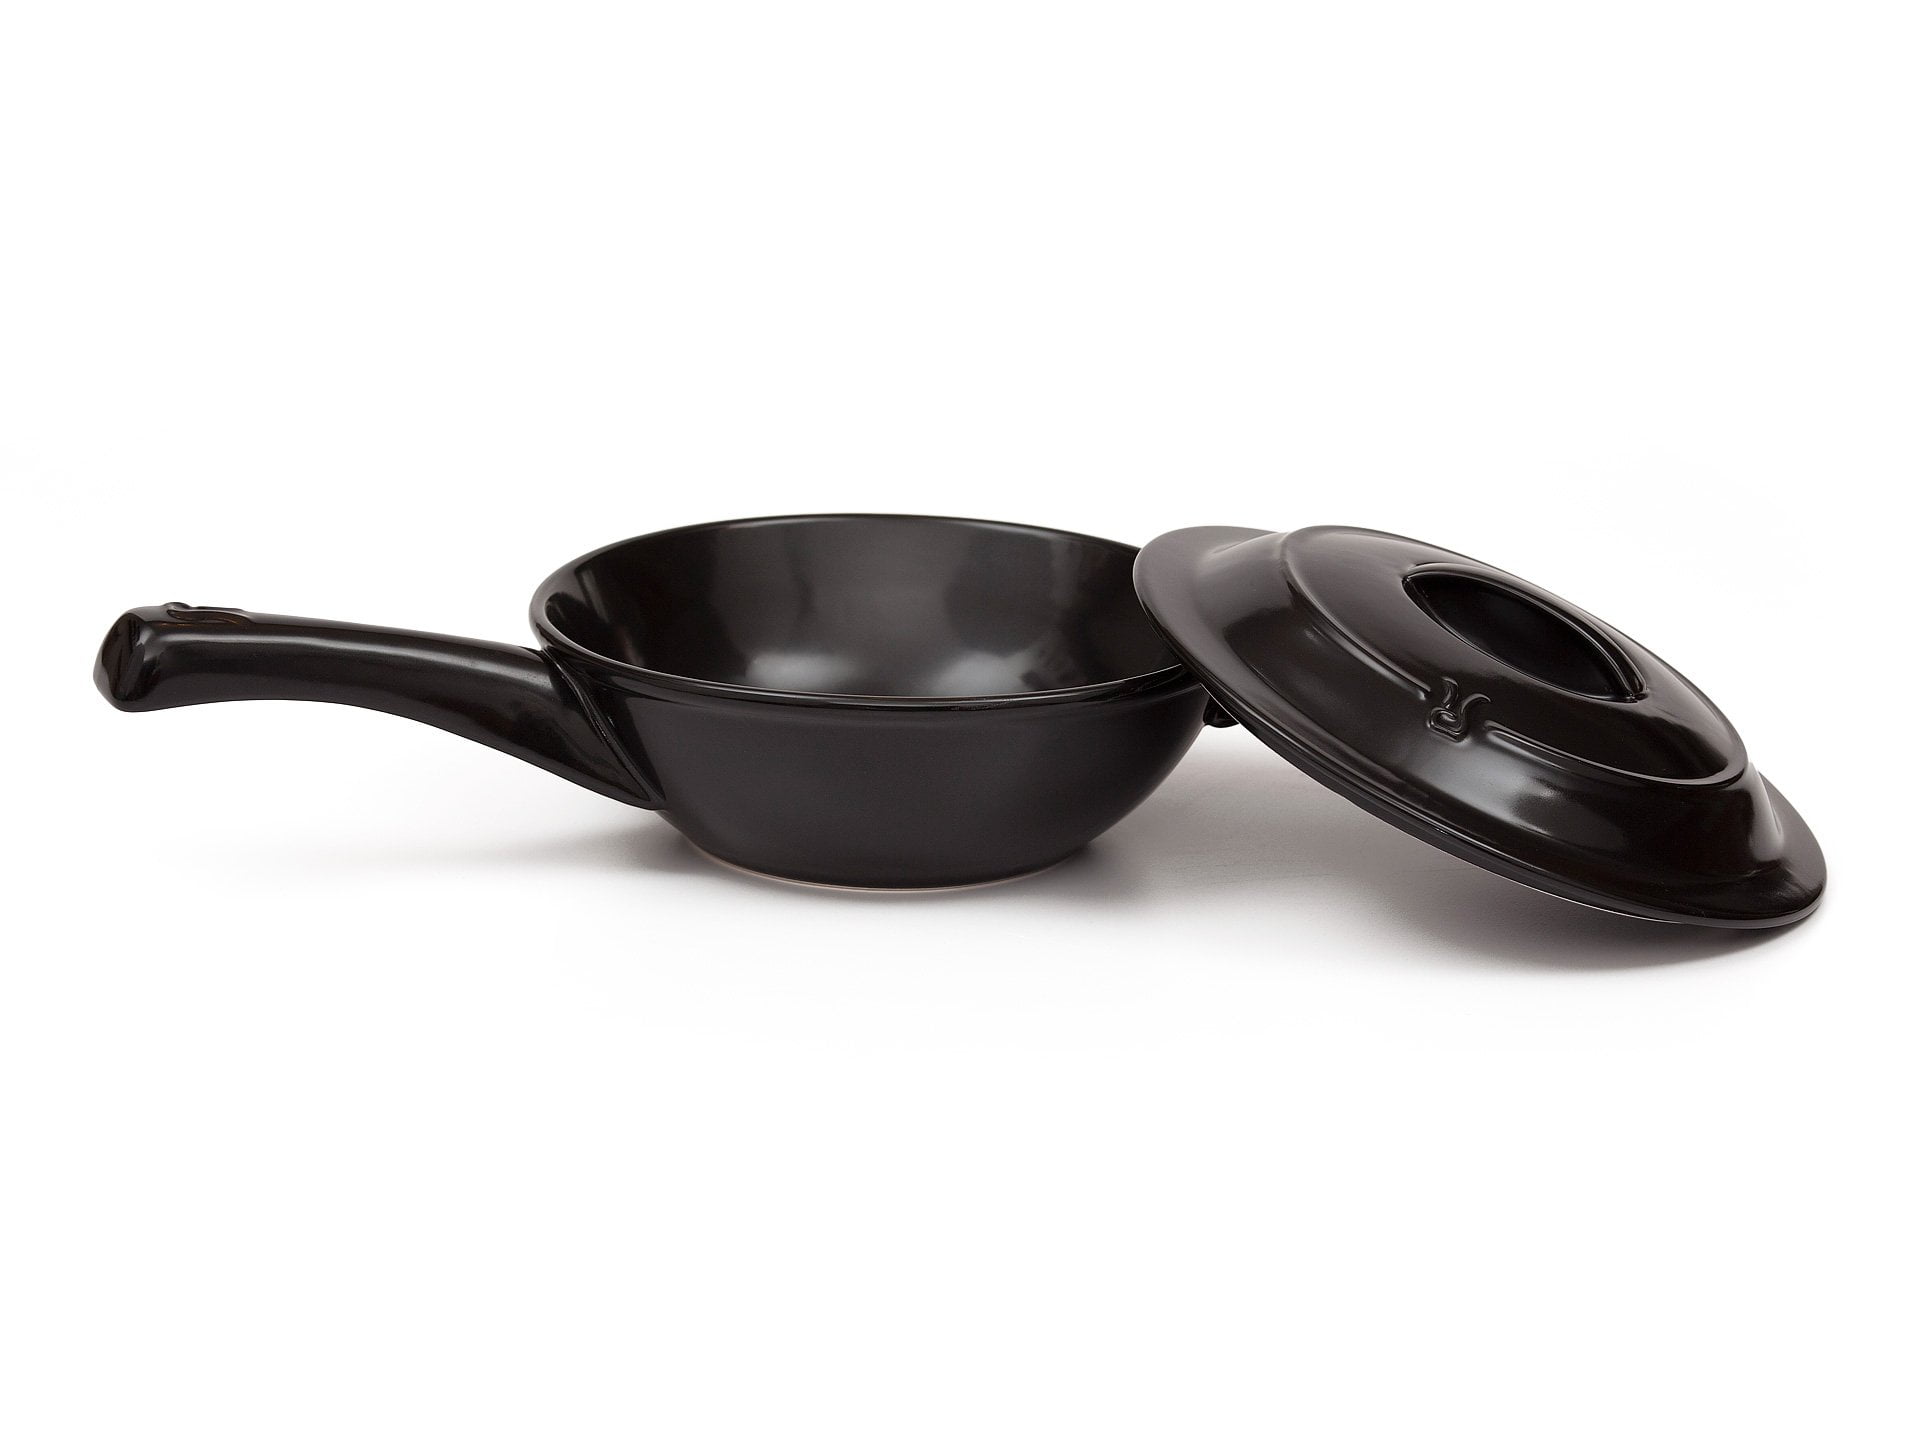 Is Ceramic Cookware Safe? - Pure and Simple Nourishment